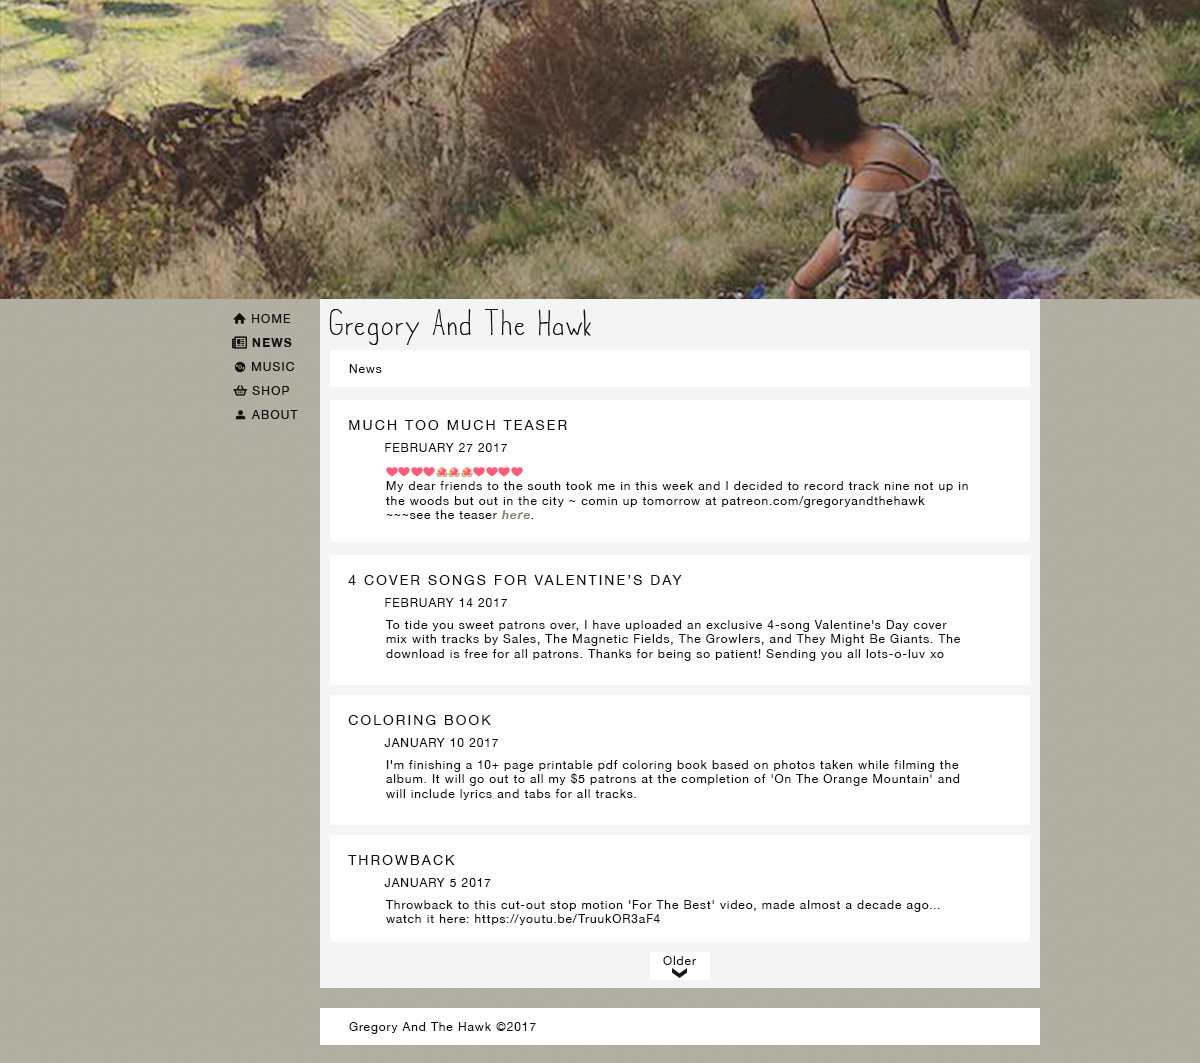 This is the news page design for the Gregory and The Hawk website. It follows the same format of the home page. The header image for this page displays the artist sitting on a grassy hill. The news feed on this page is drawn from their Facebook feed.